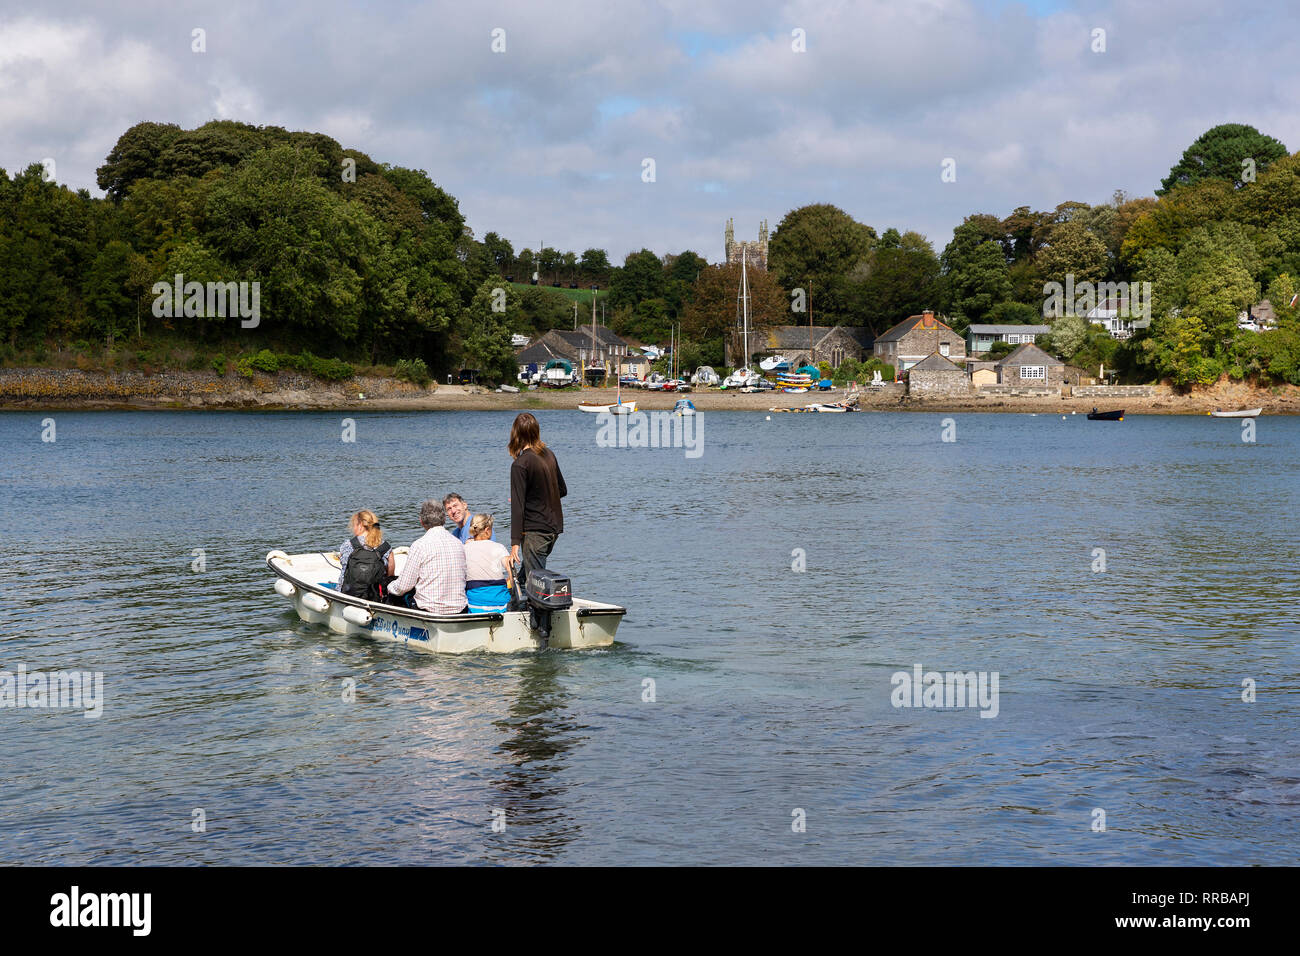 LIZARD, UK - SEPTEMBER 17, 2018: A small passenger ferry carrys walkers across Gillan Creek from Gillan to St Anthony-in-Meneage in Cornwall. Stock Photo